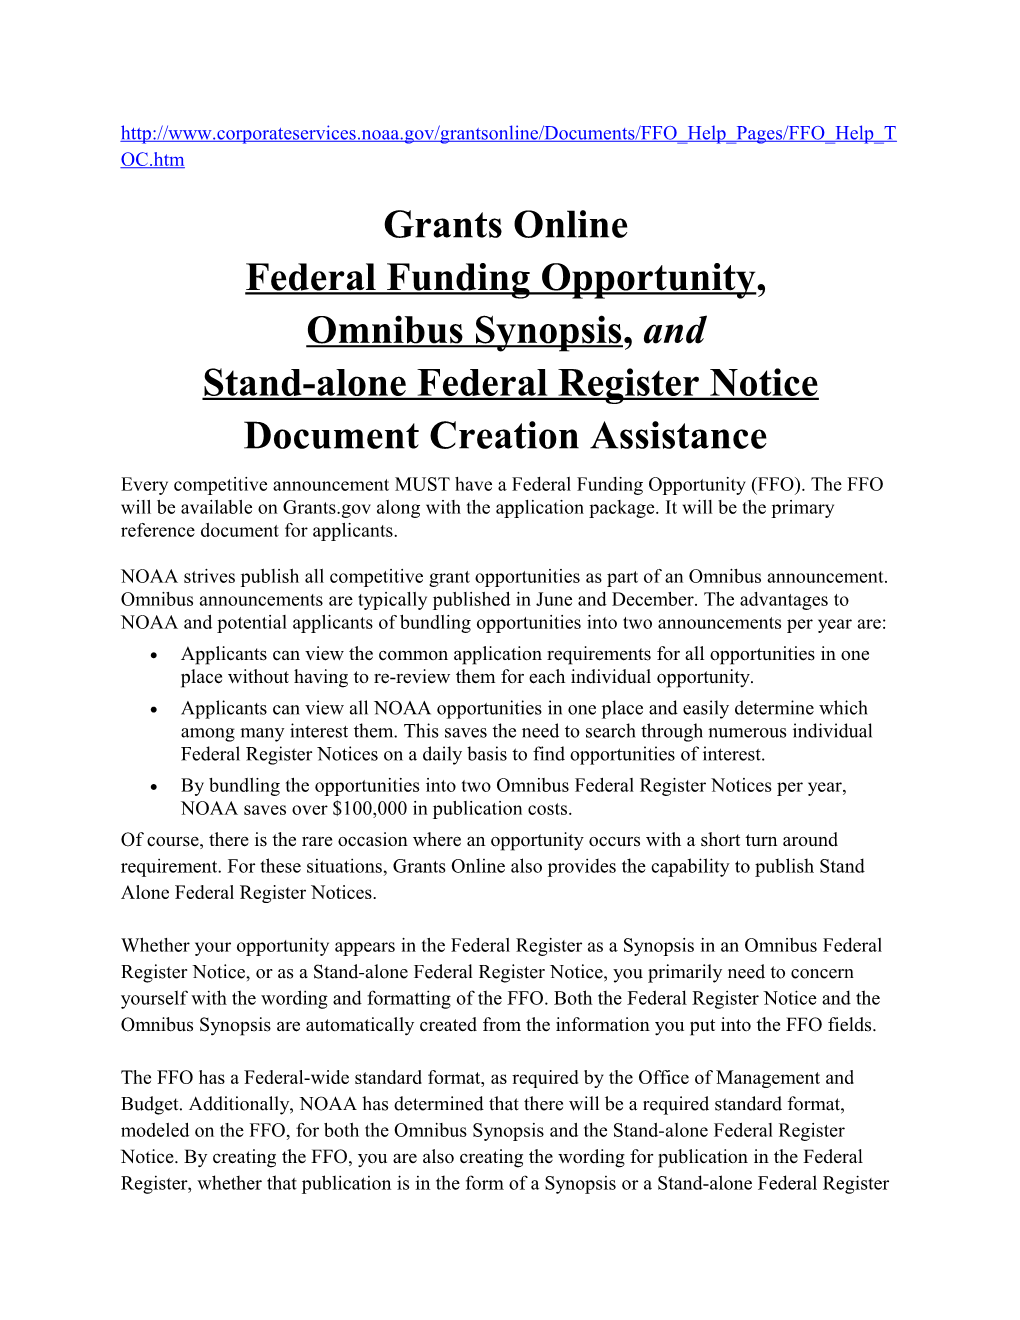 Grants Online Federal Funding Opportunity, Omnibus Synopsis, and Stand-Alone Federal Register